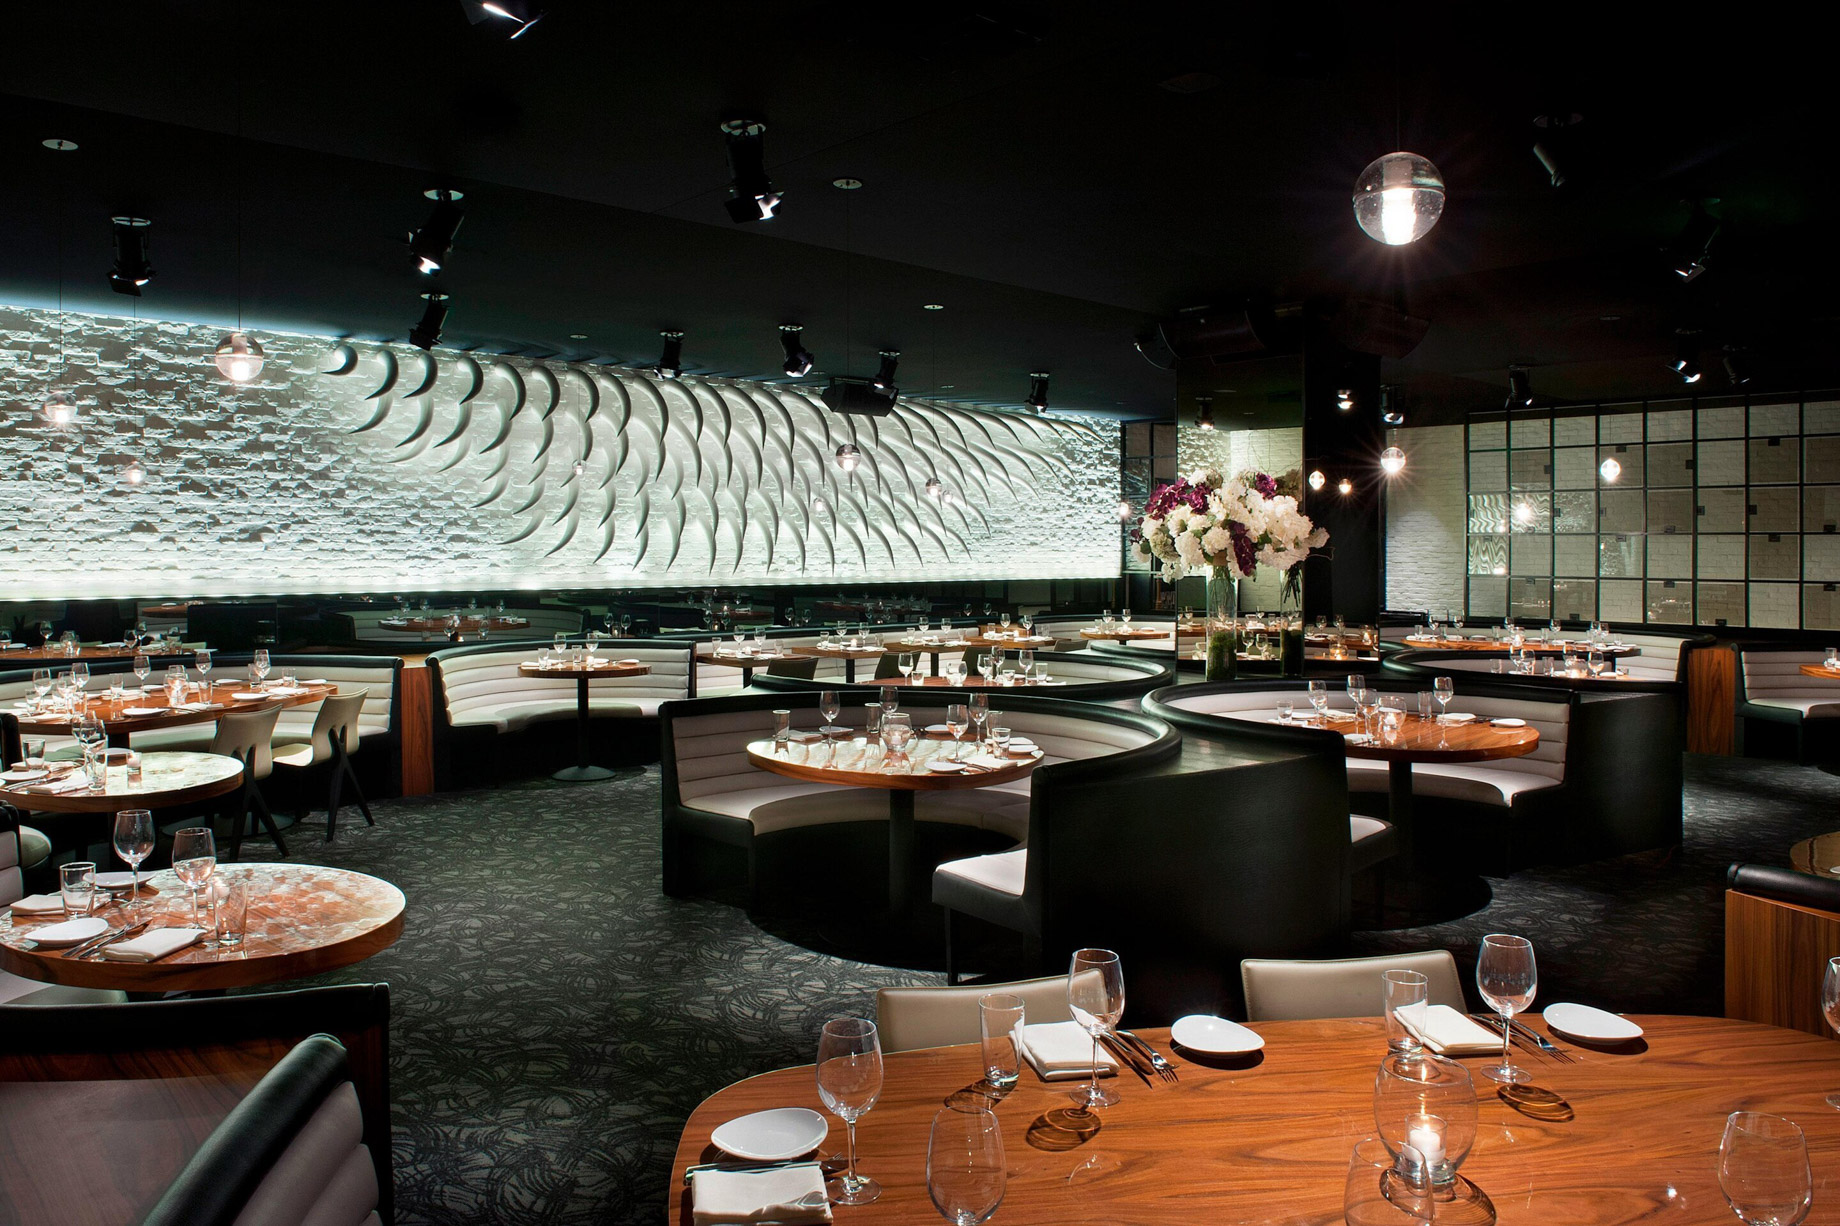 W Los Angeles West Beverly Hills Hotel - Los Angeles, CA, USA - STK Los Angeles Dining Room